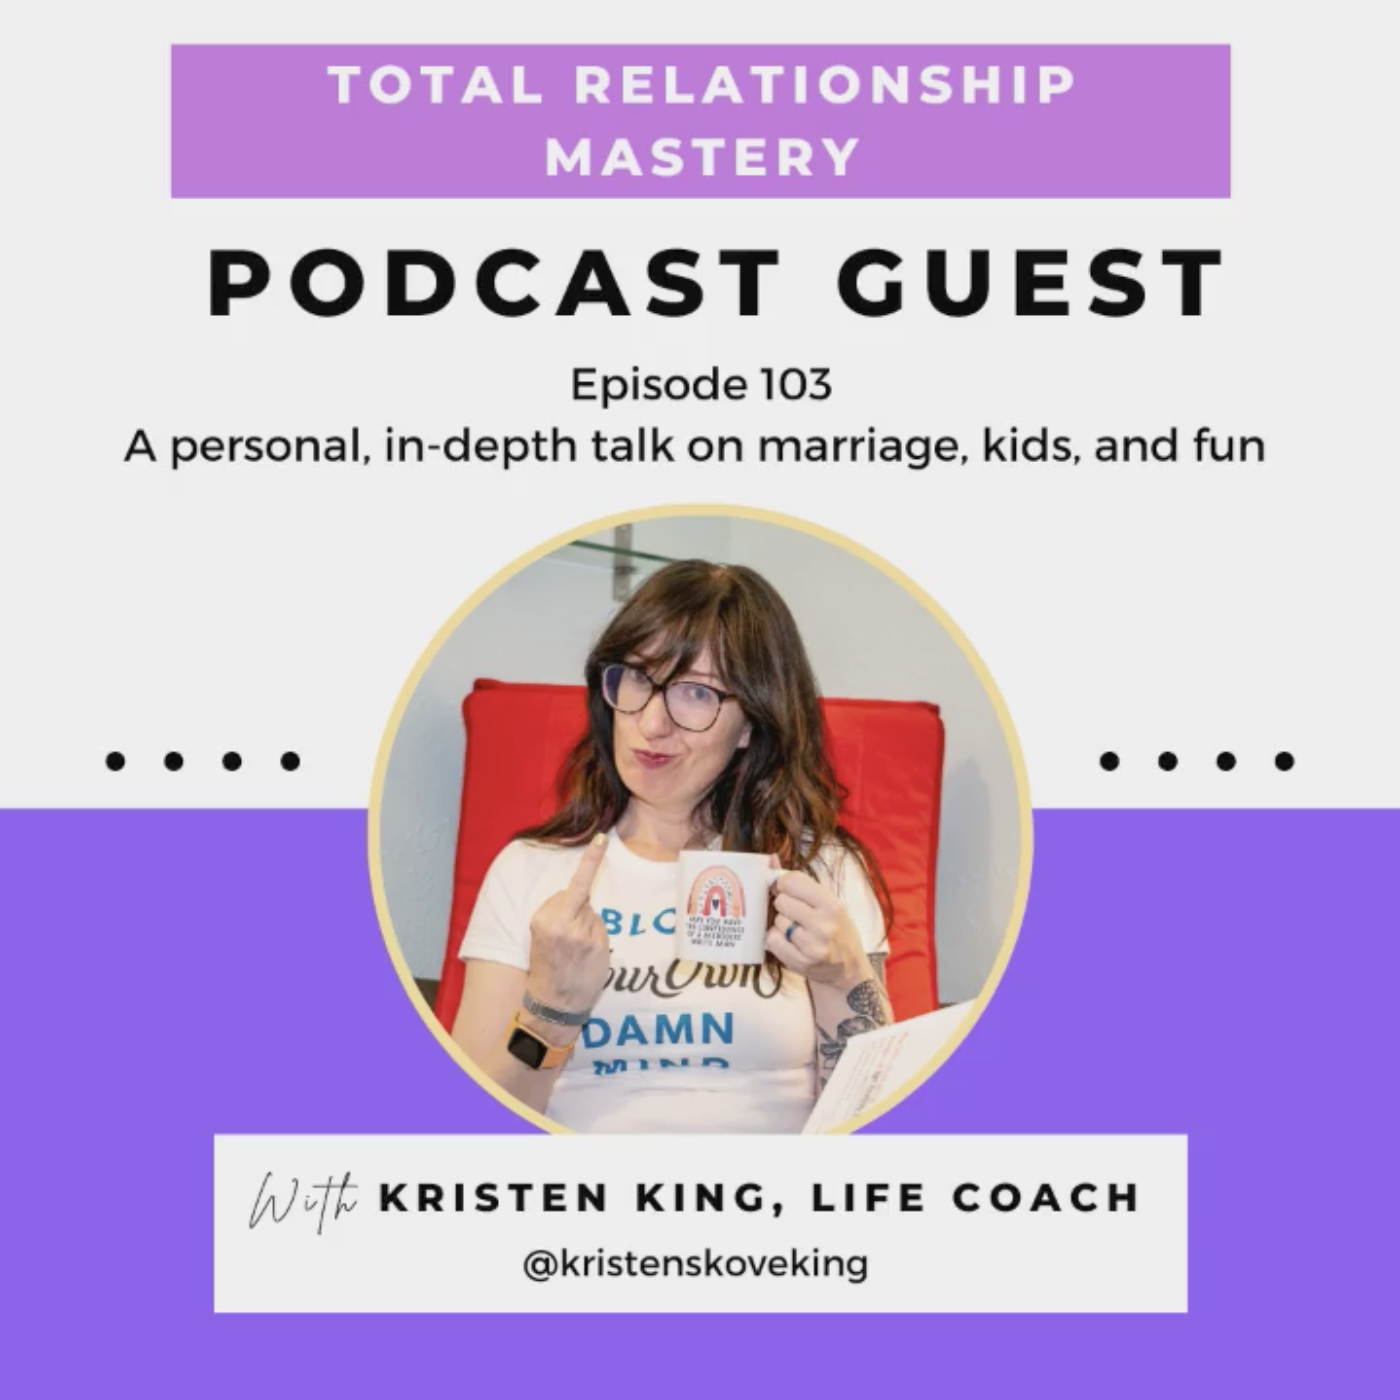 New Interview: Personal, In-Depth talk on Marriage, Kids & Fun, on the Total Relationship Mastery Podcast